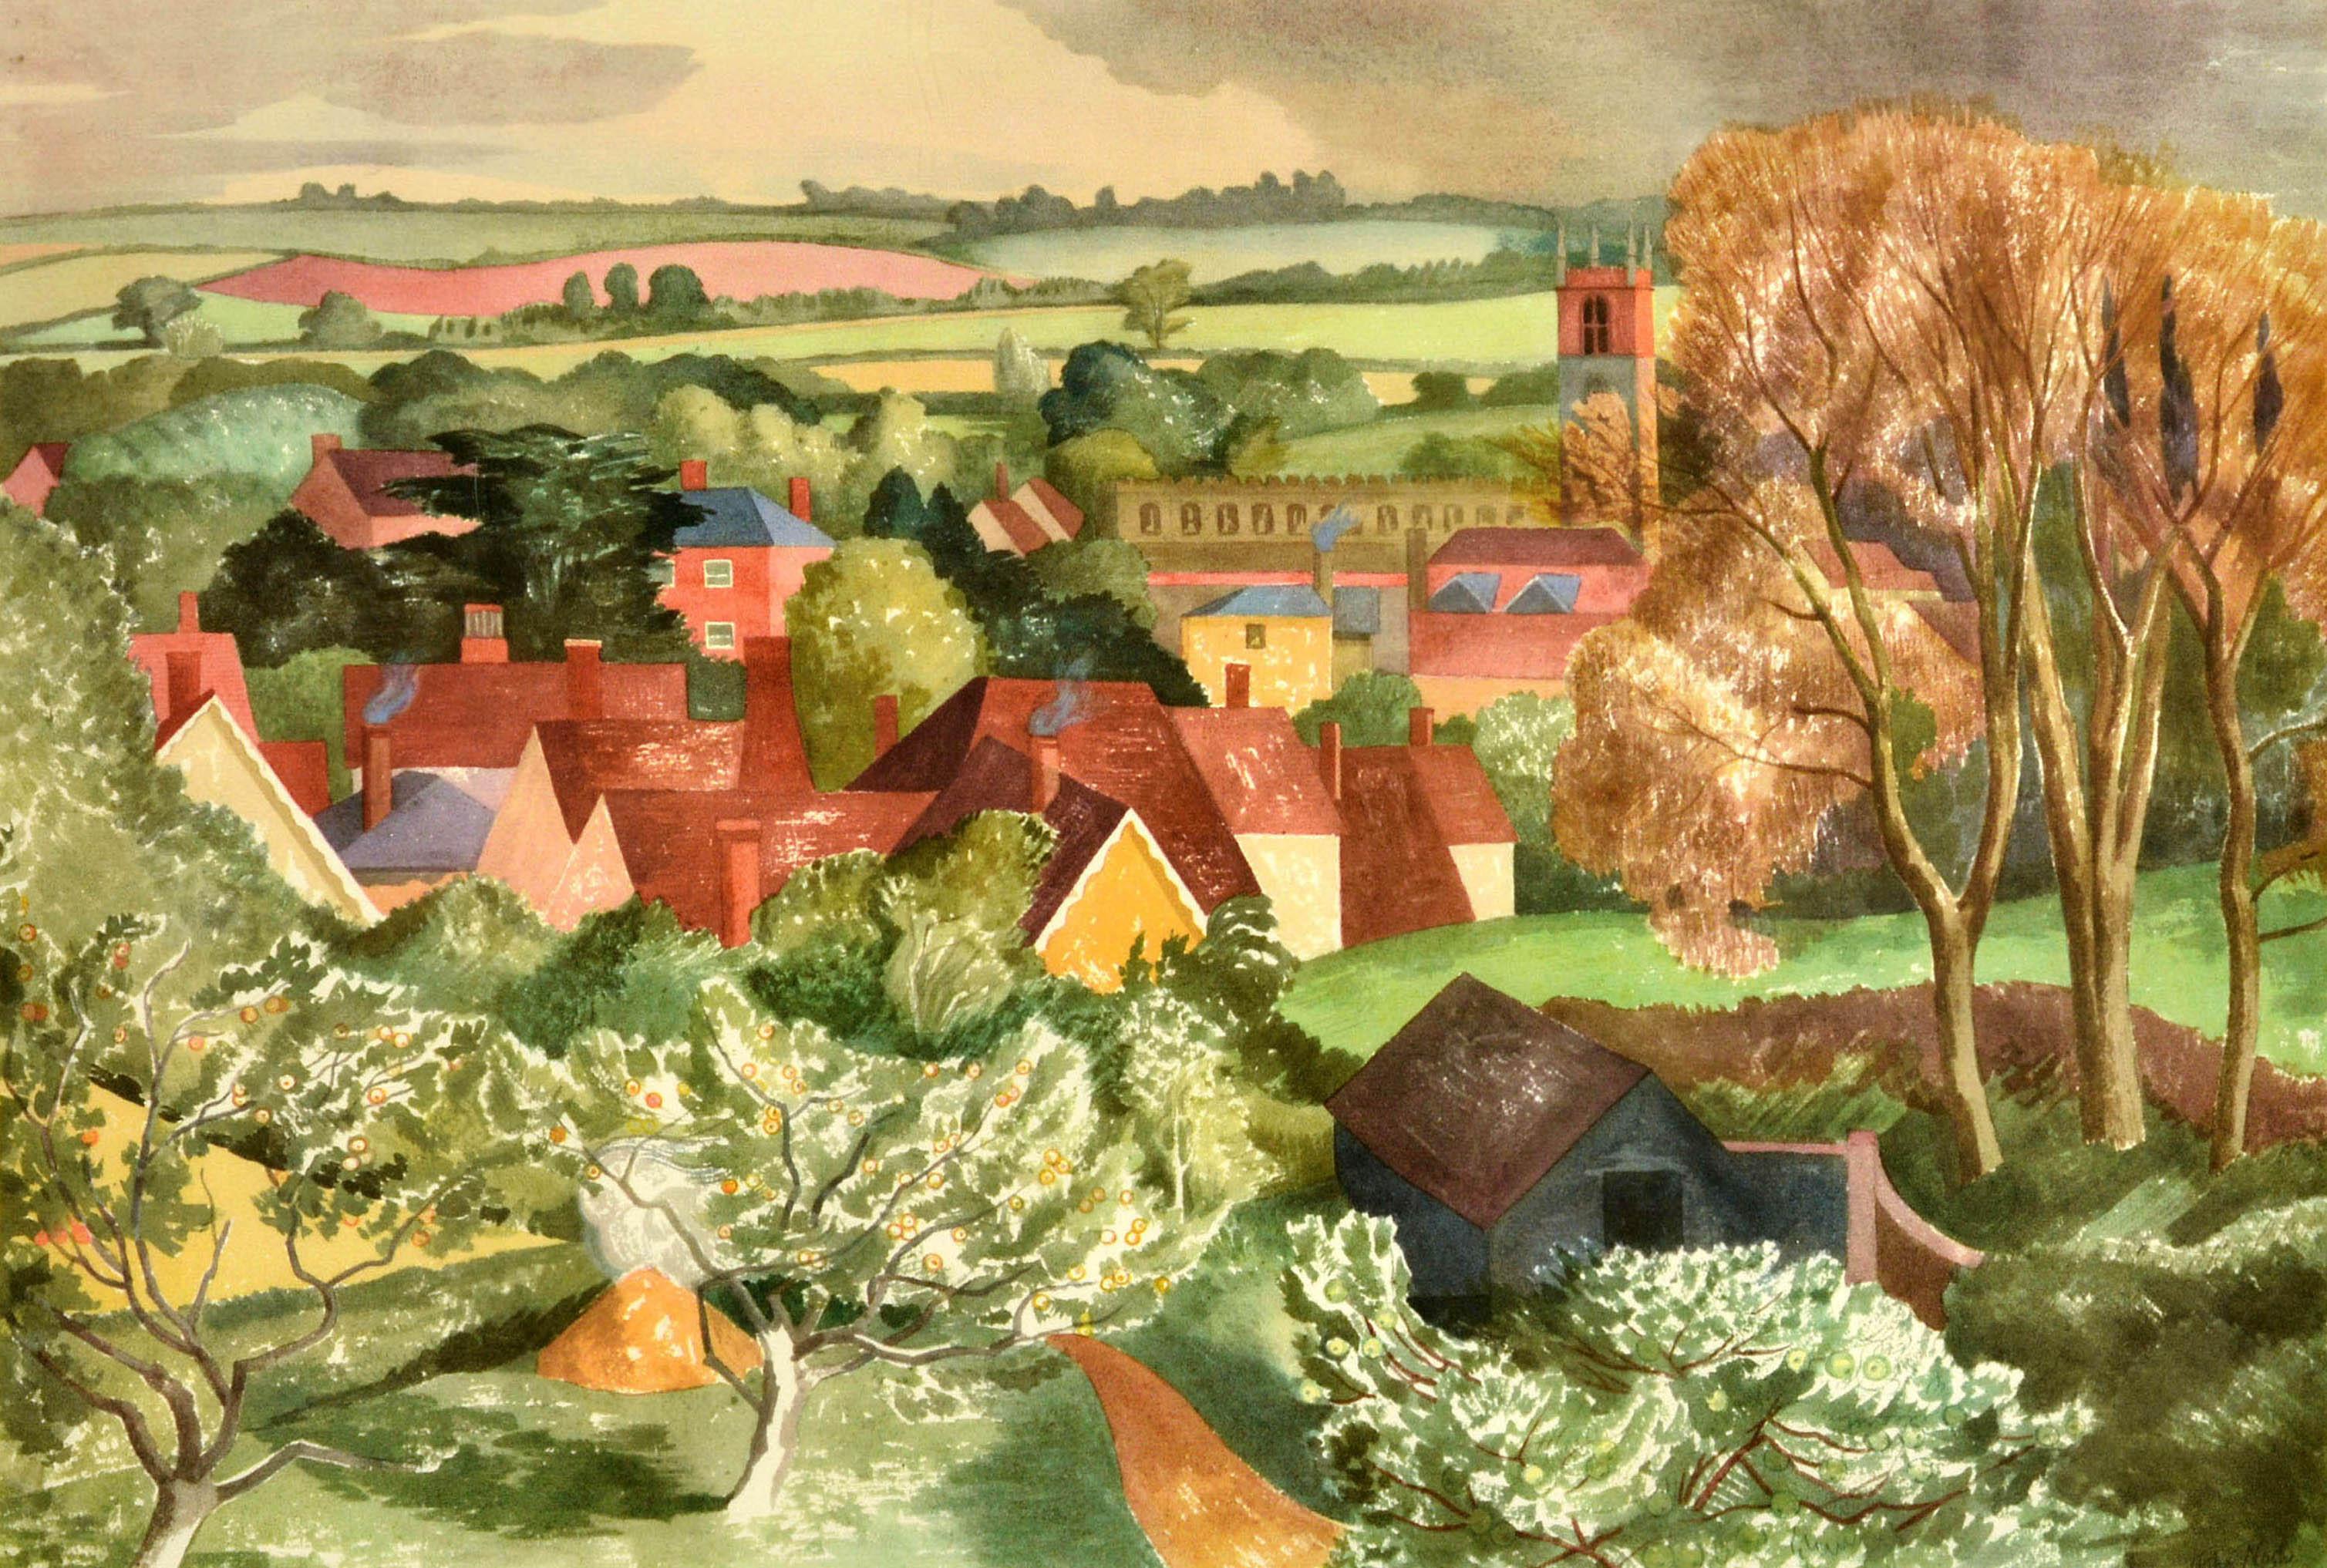 Original vintage post office advertising poster featuring a great artwork by a British artist John Nash (1893-1977) depicting a quaint village with red-roofed houses, the caption below the image reads - Nayland in Suffolk but Correct Postal Address: